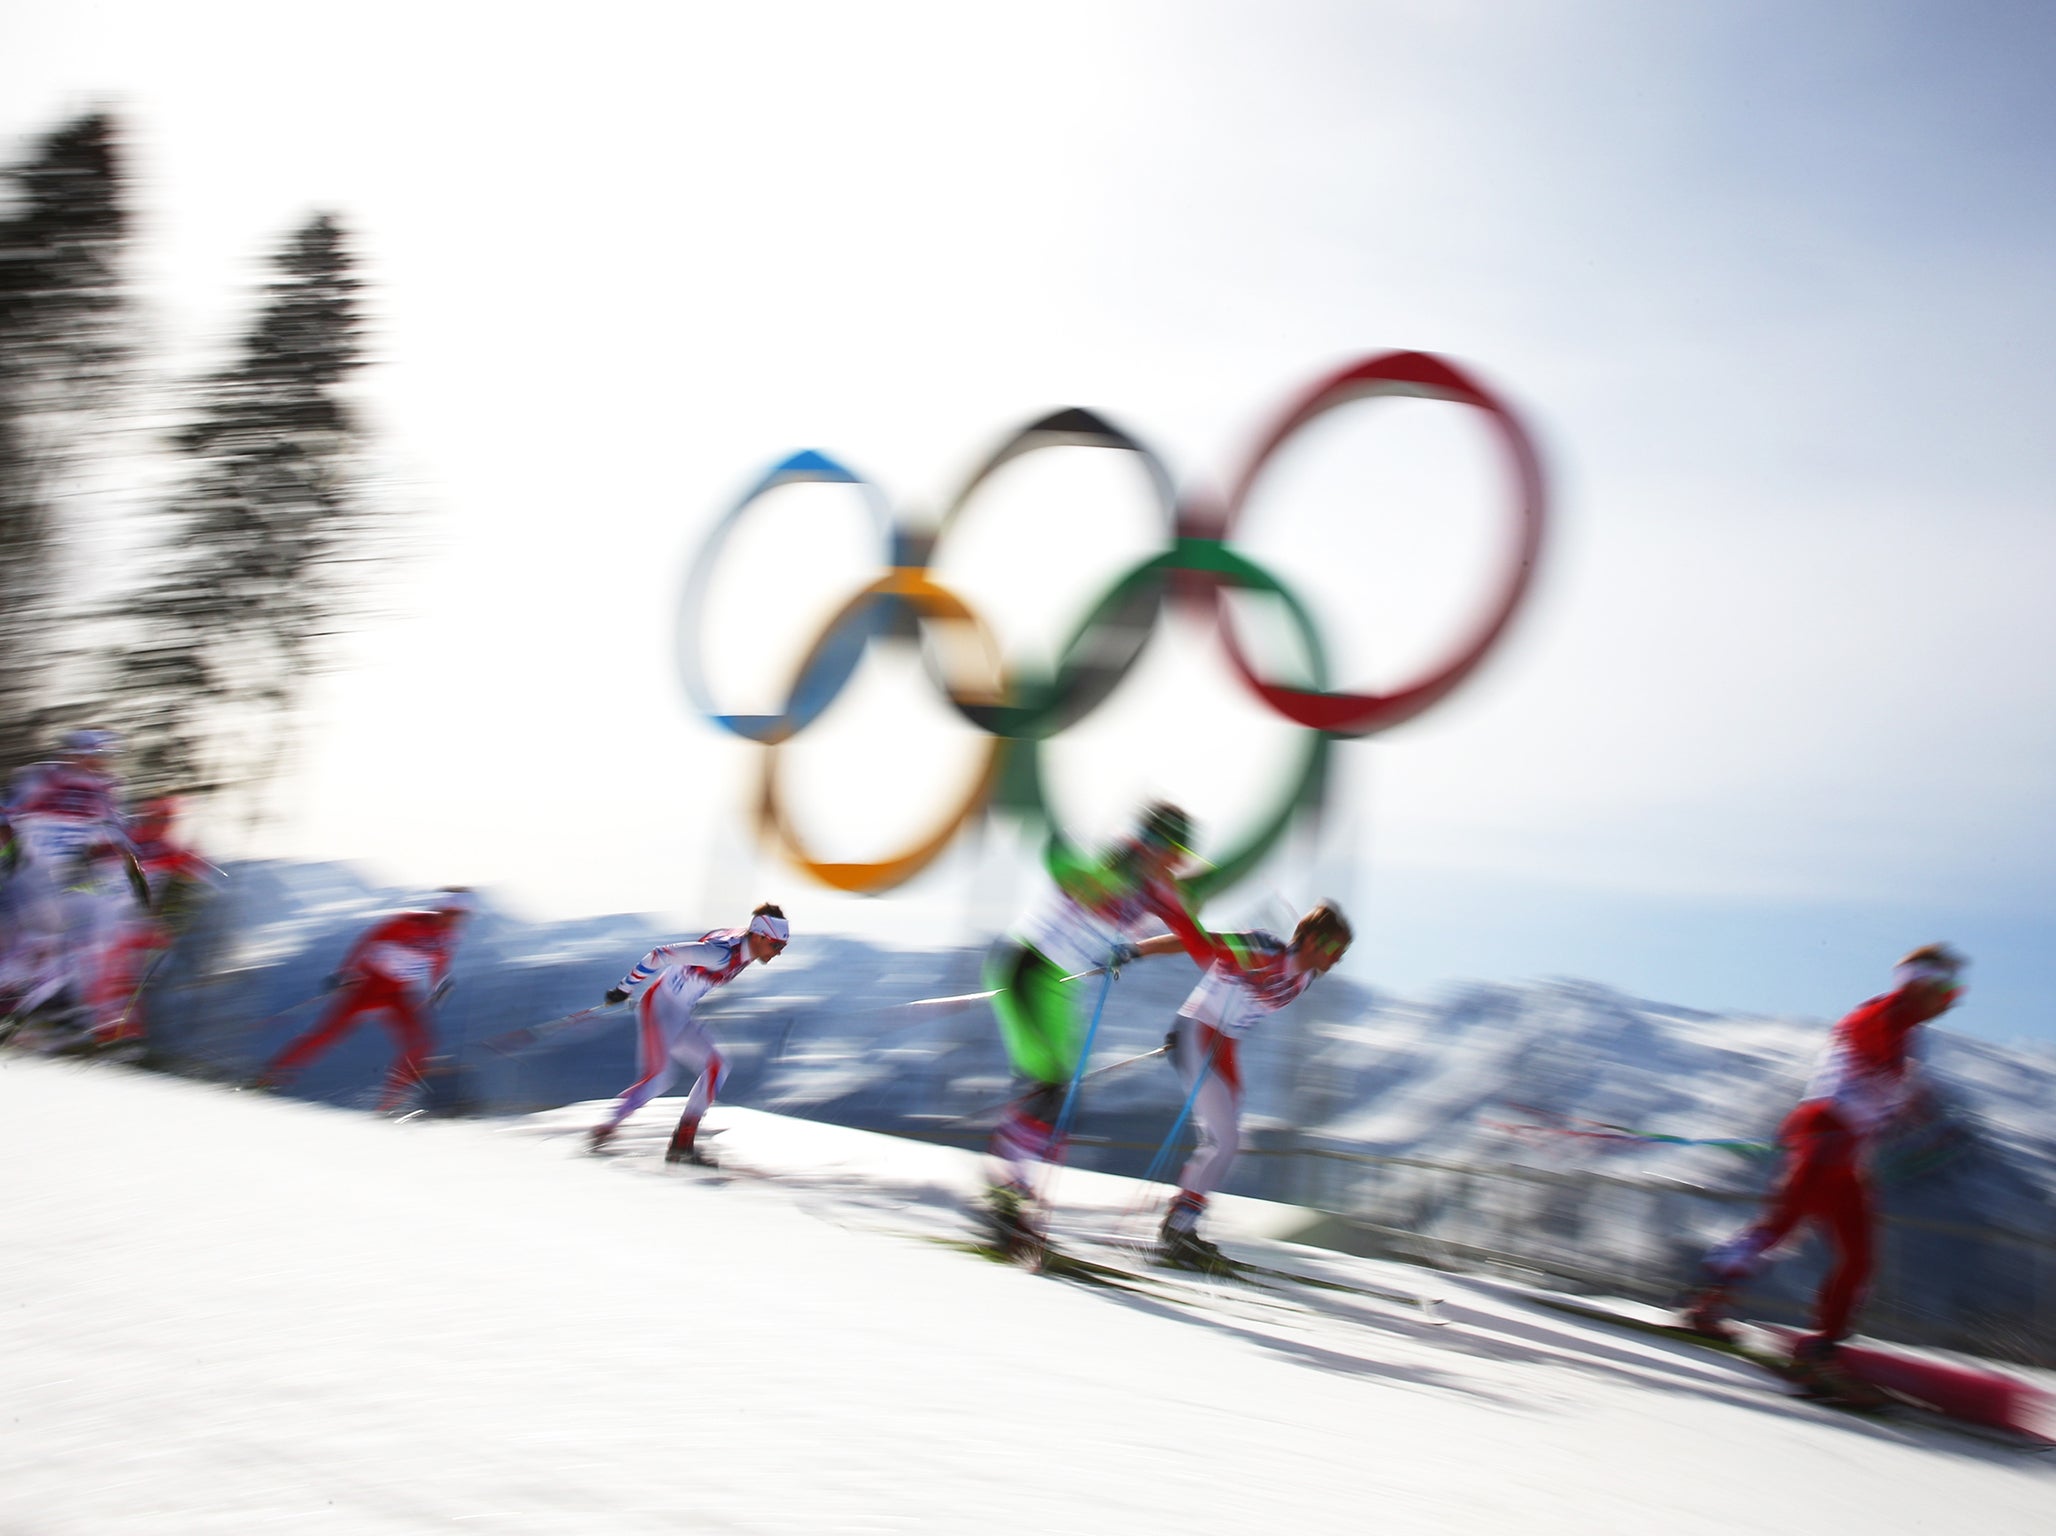 The Winter Olympics begins on 9 February